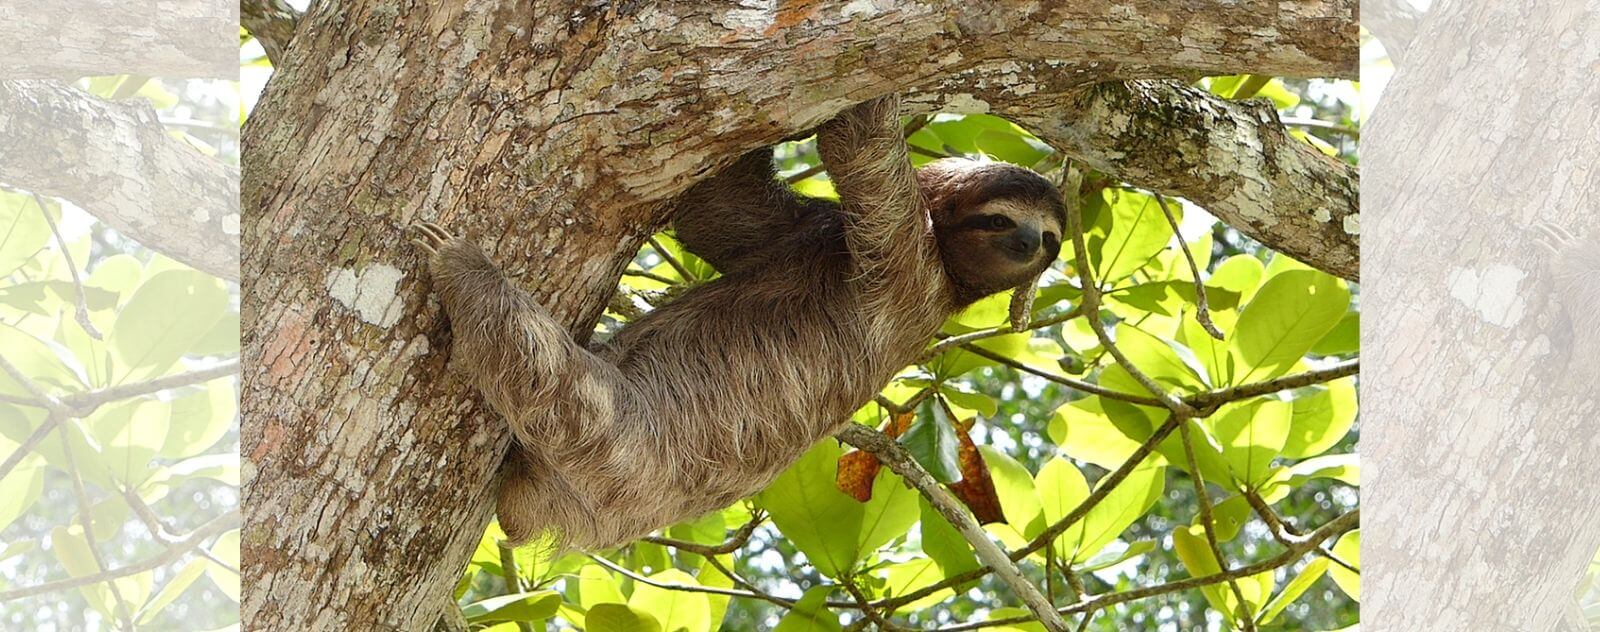 Sloth Hanging from a Tree Upside Down